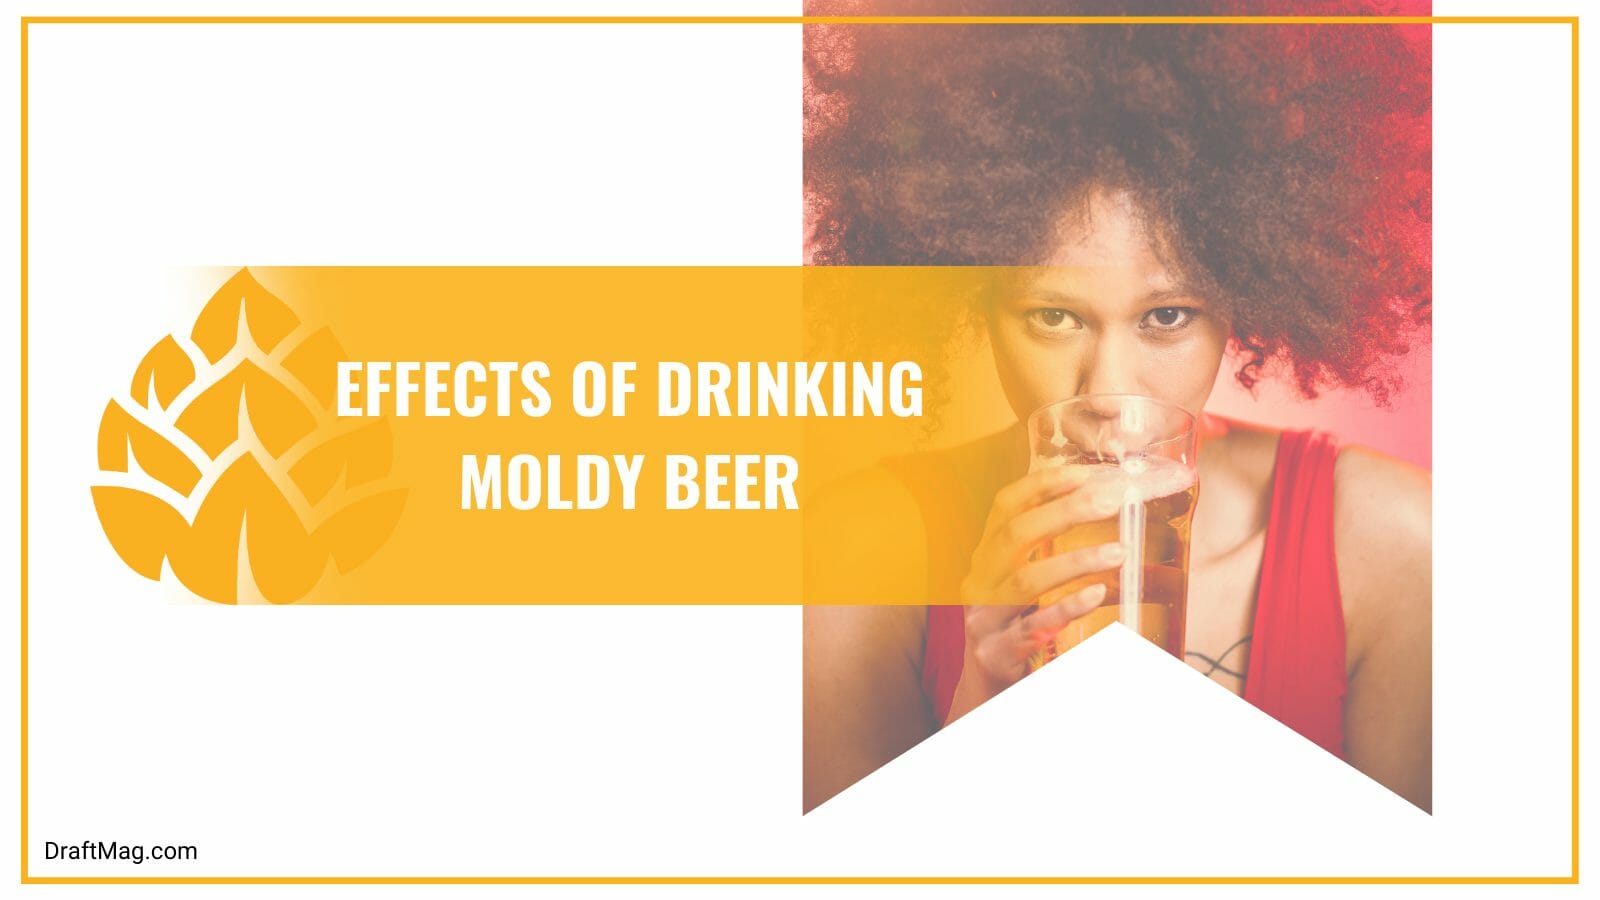 Effects of drinking moldy beer